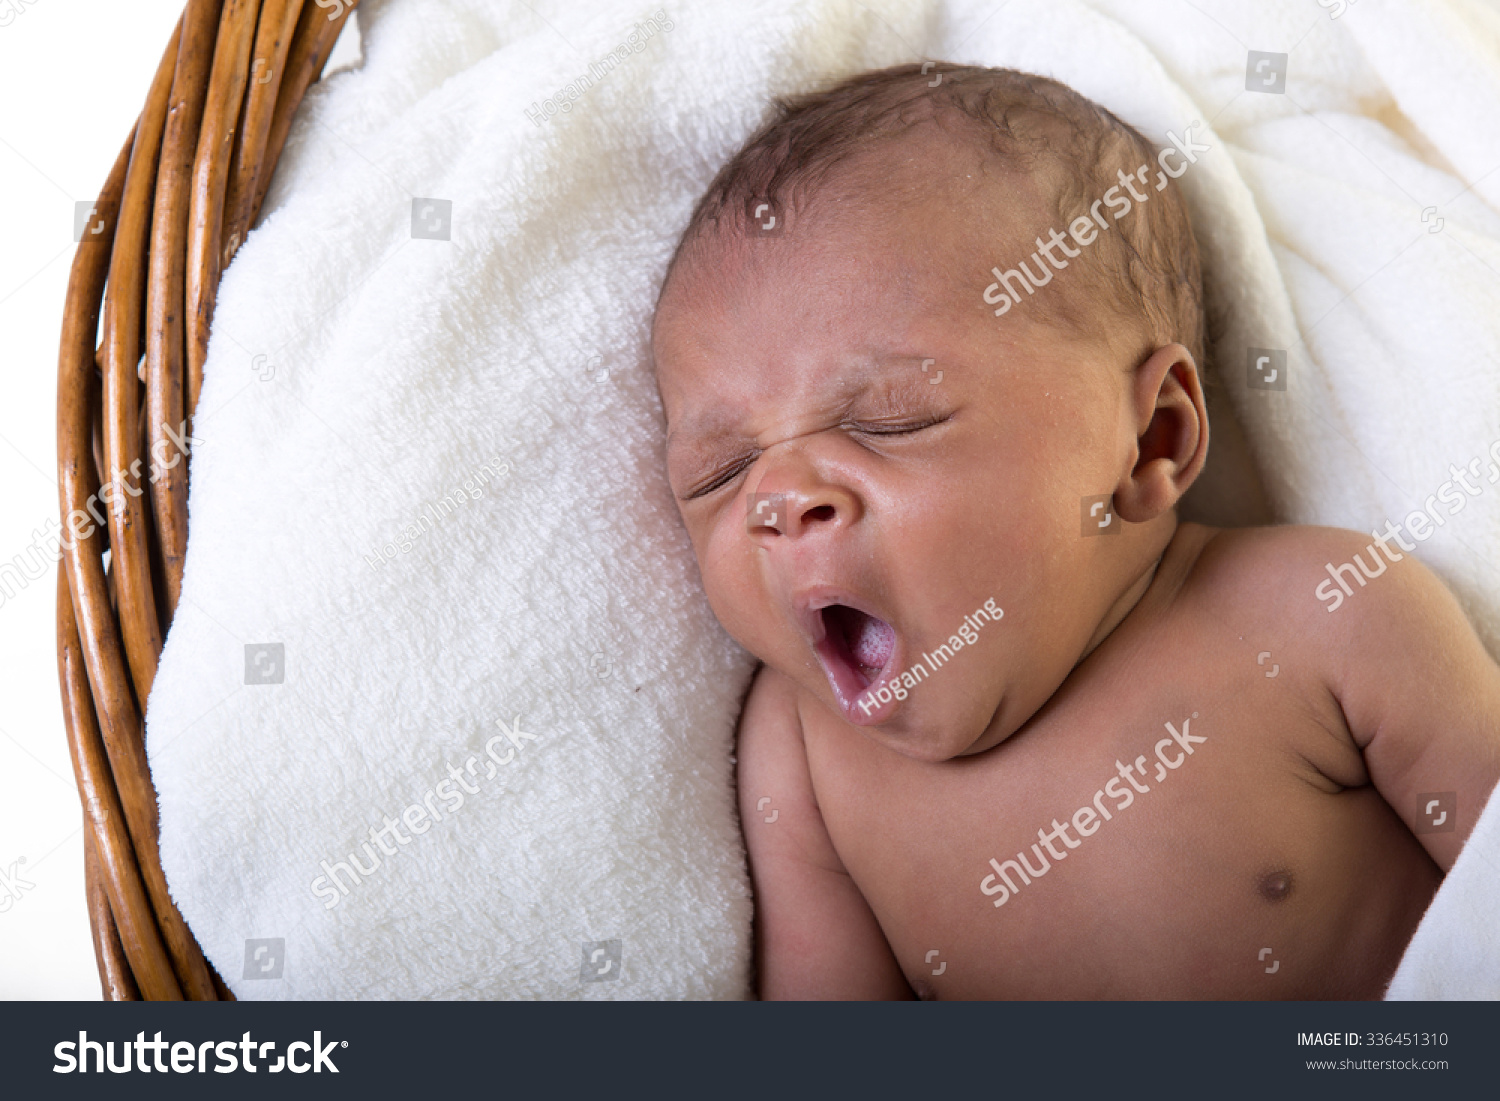 African american infant #336451310